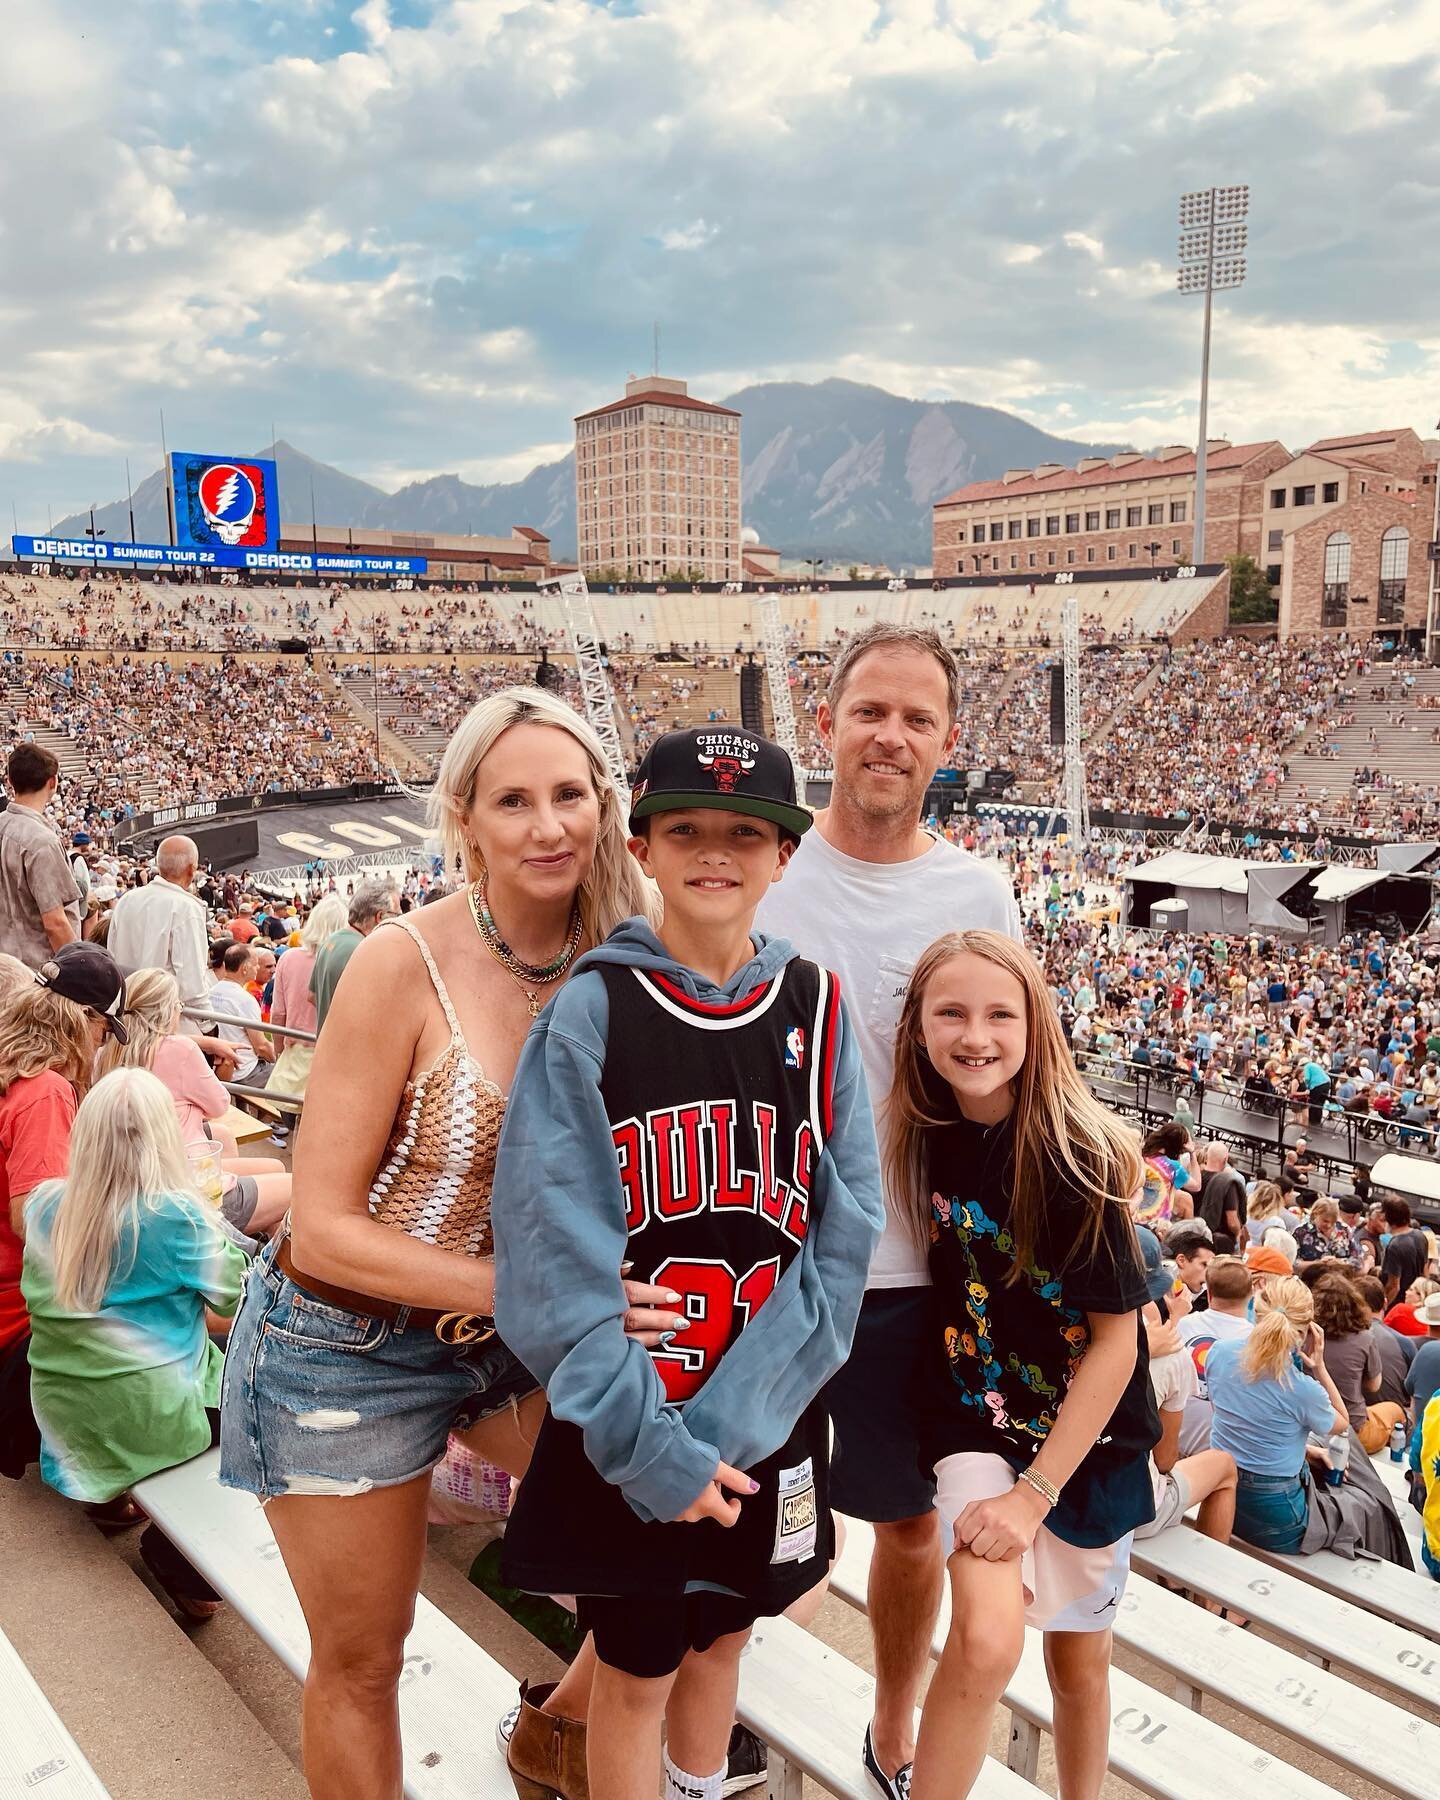 #deadandcompany concert with the family at CU this past weekend.